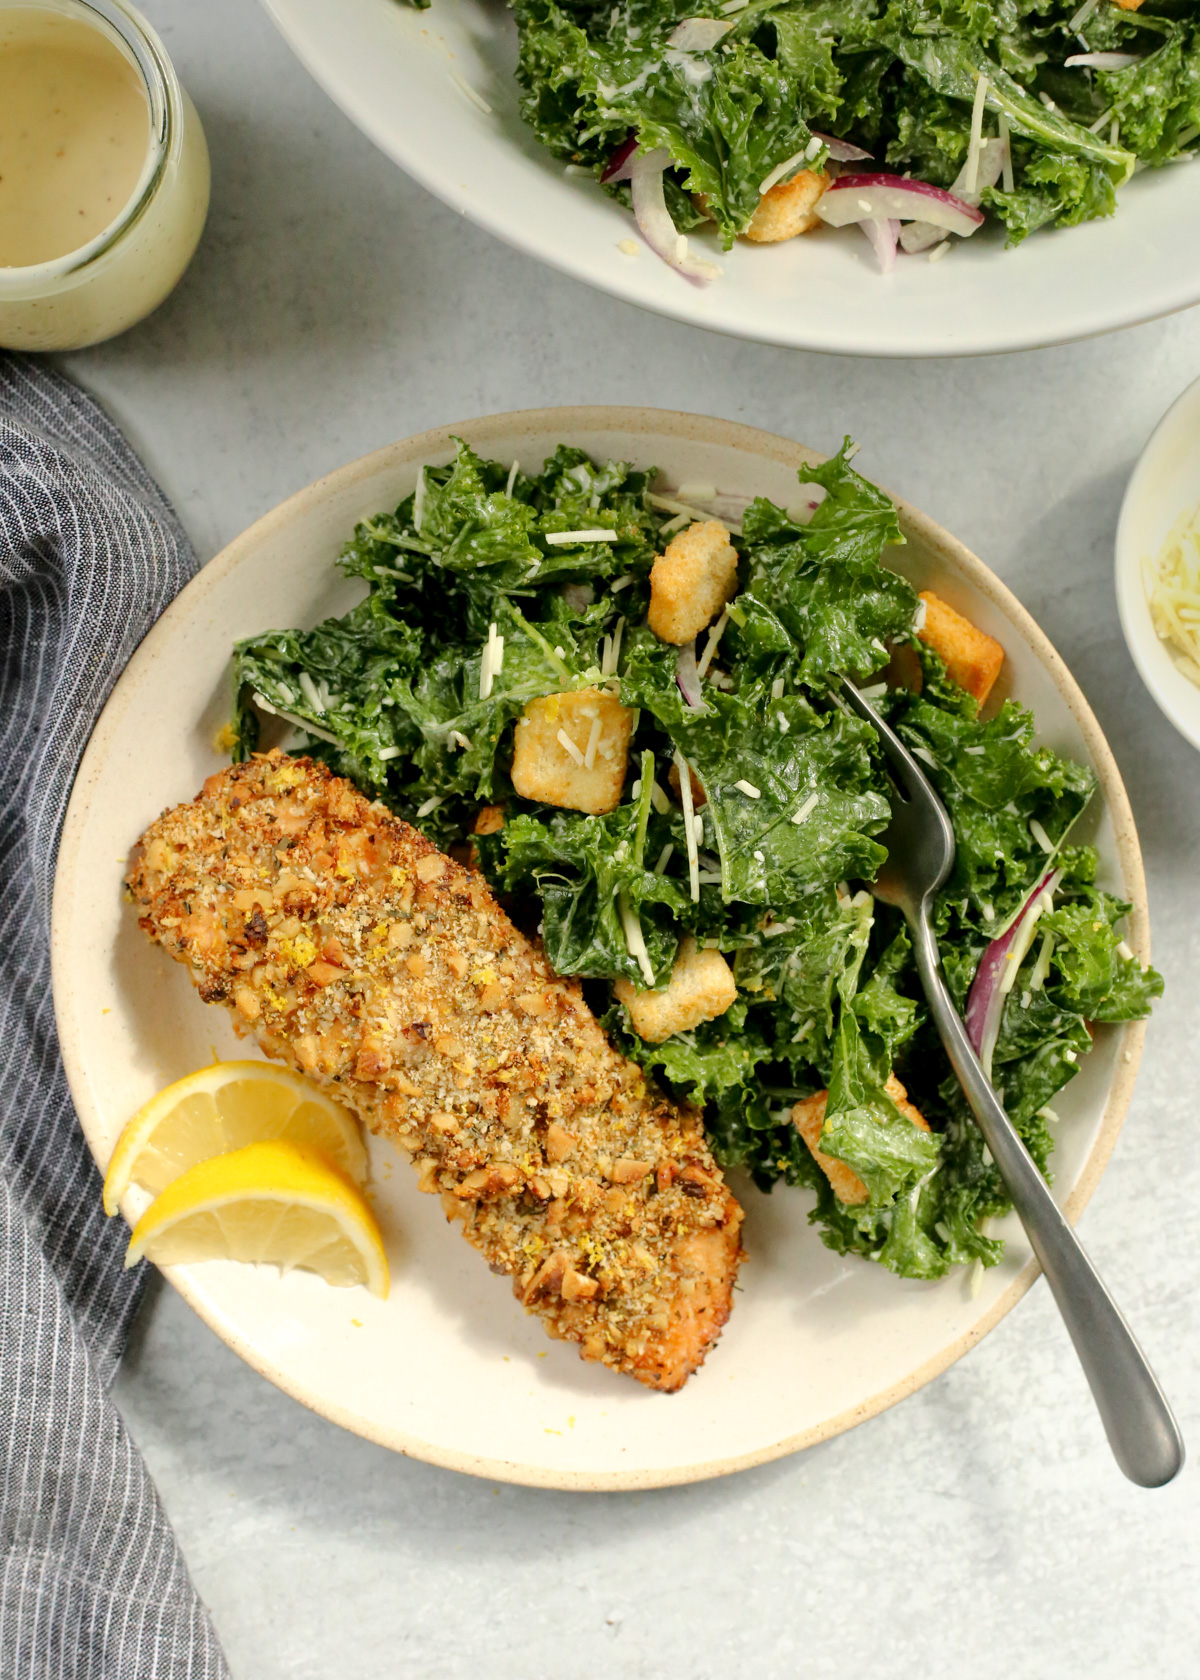 Overhead view of a cooked salmon fillet, coated in a walnut-breadcrumb crust, served with a side salad and lemon wedges with a silver fork arranged on the side of the dinner plate